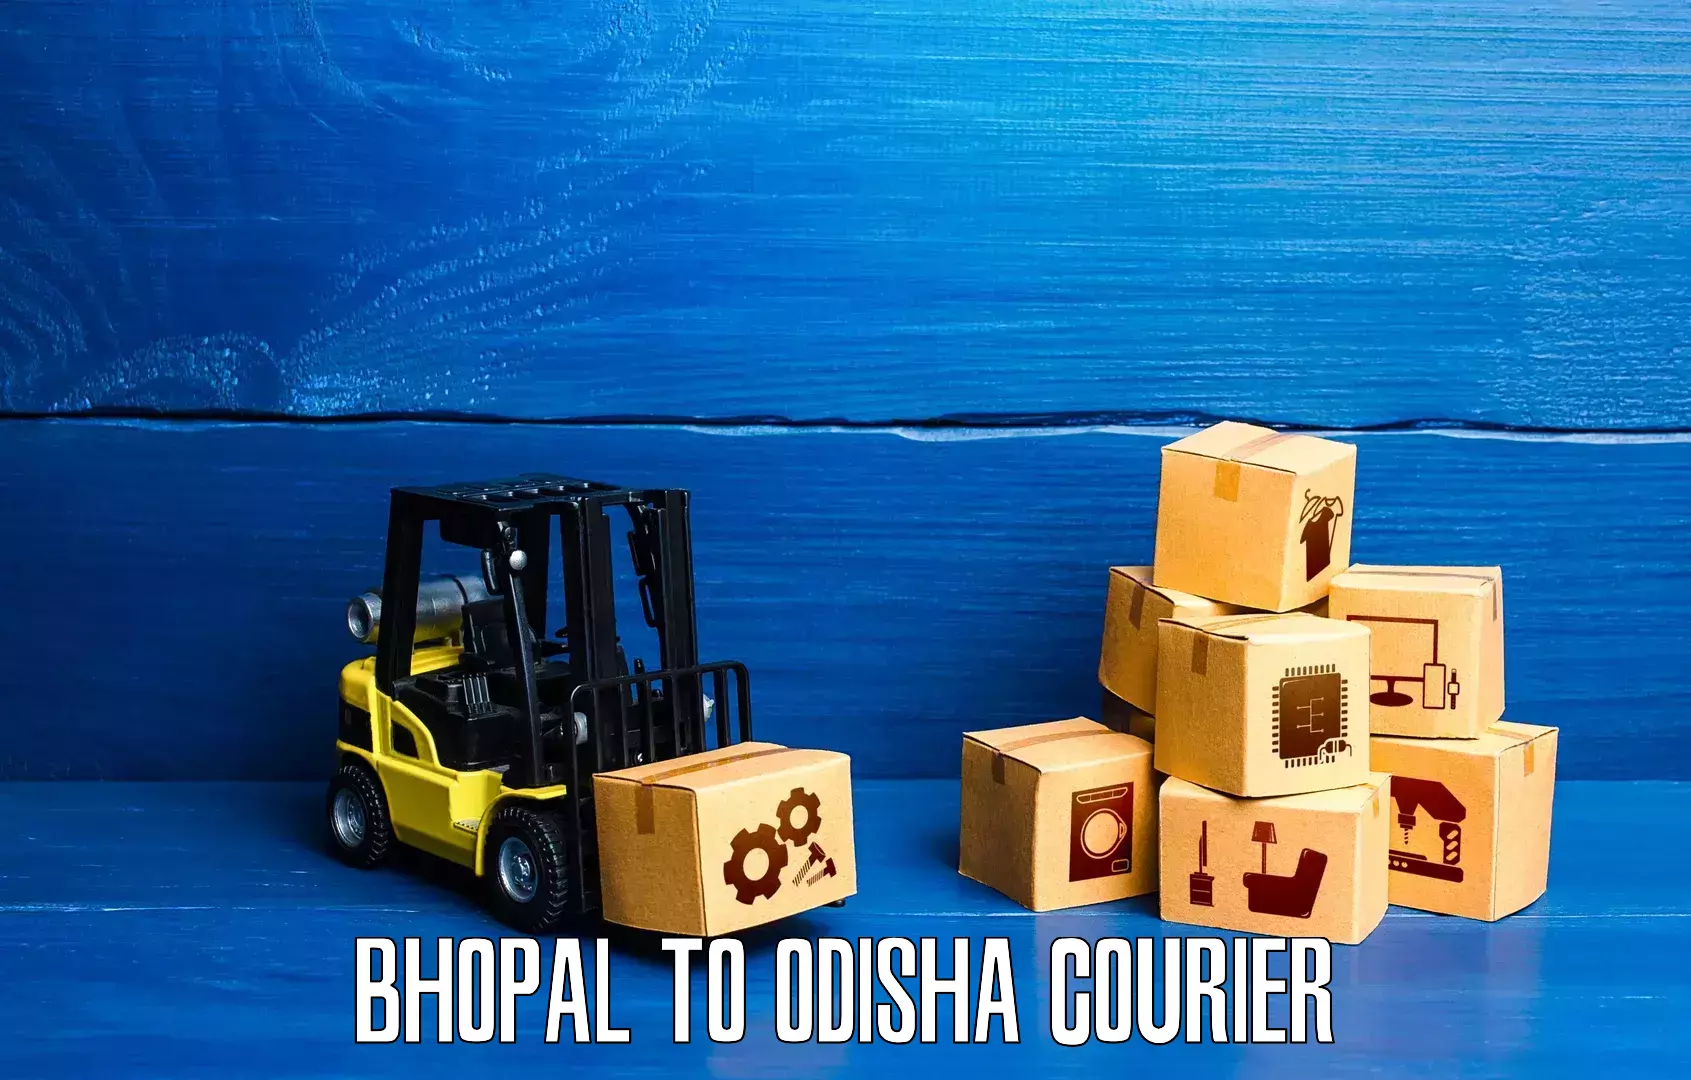 Reliable courier service Bhopal to Telkoi